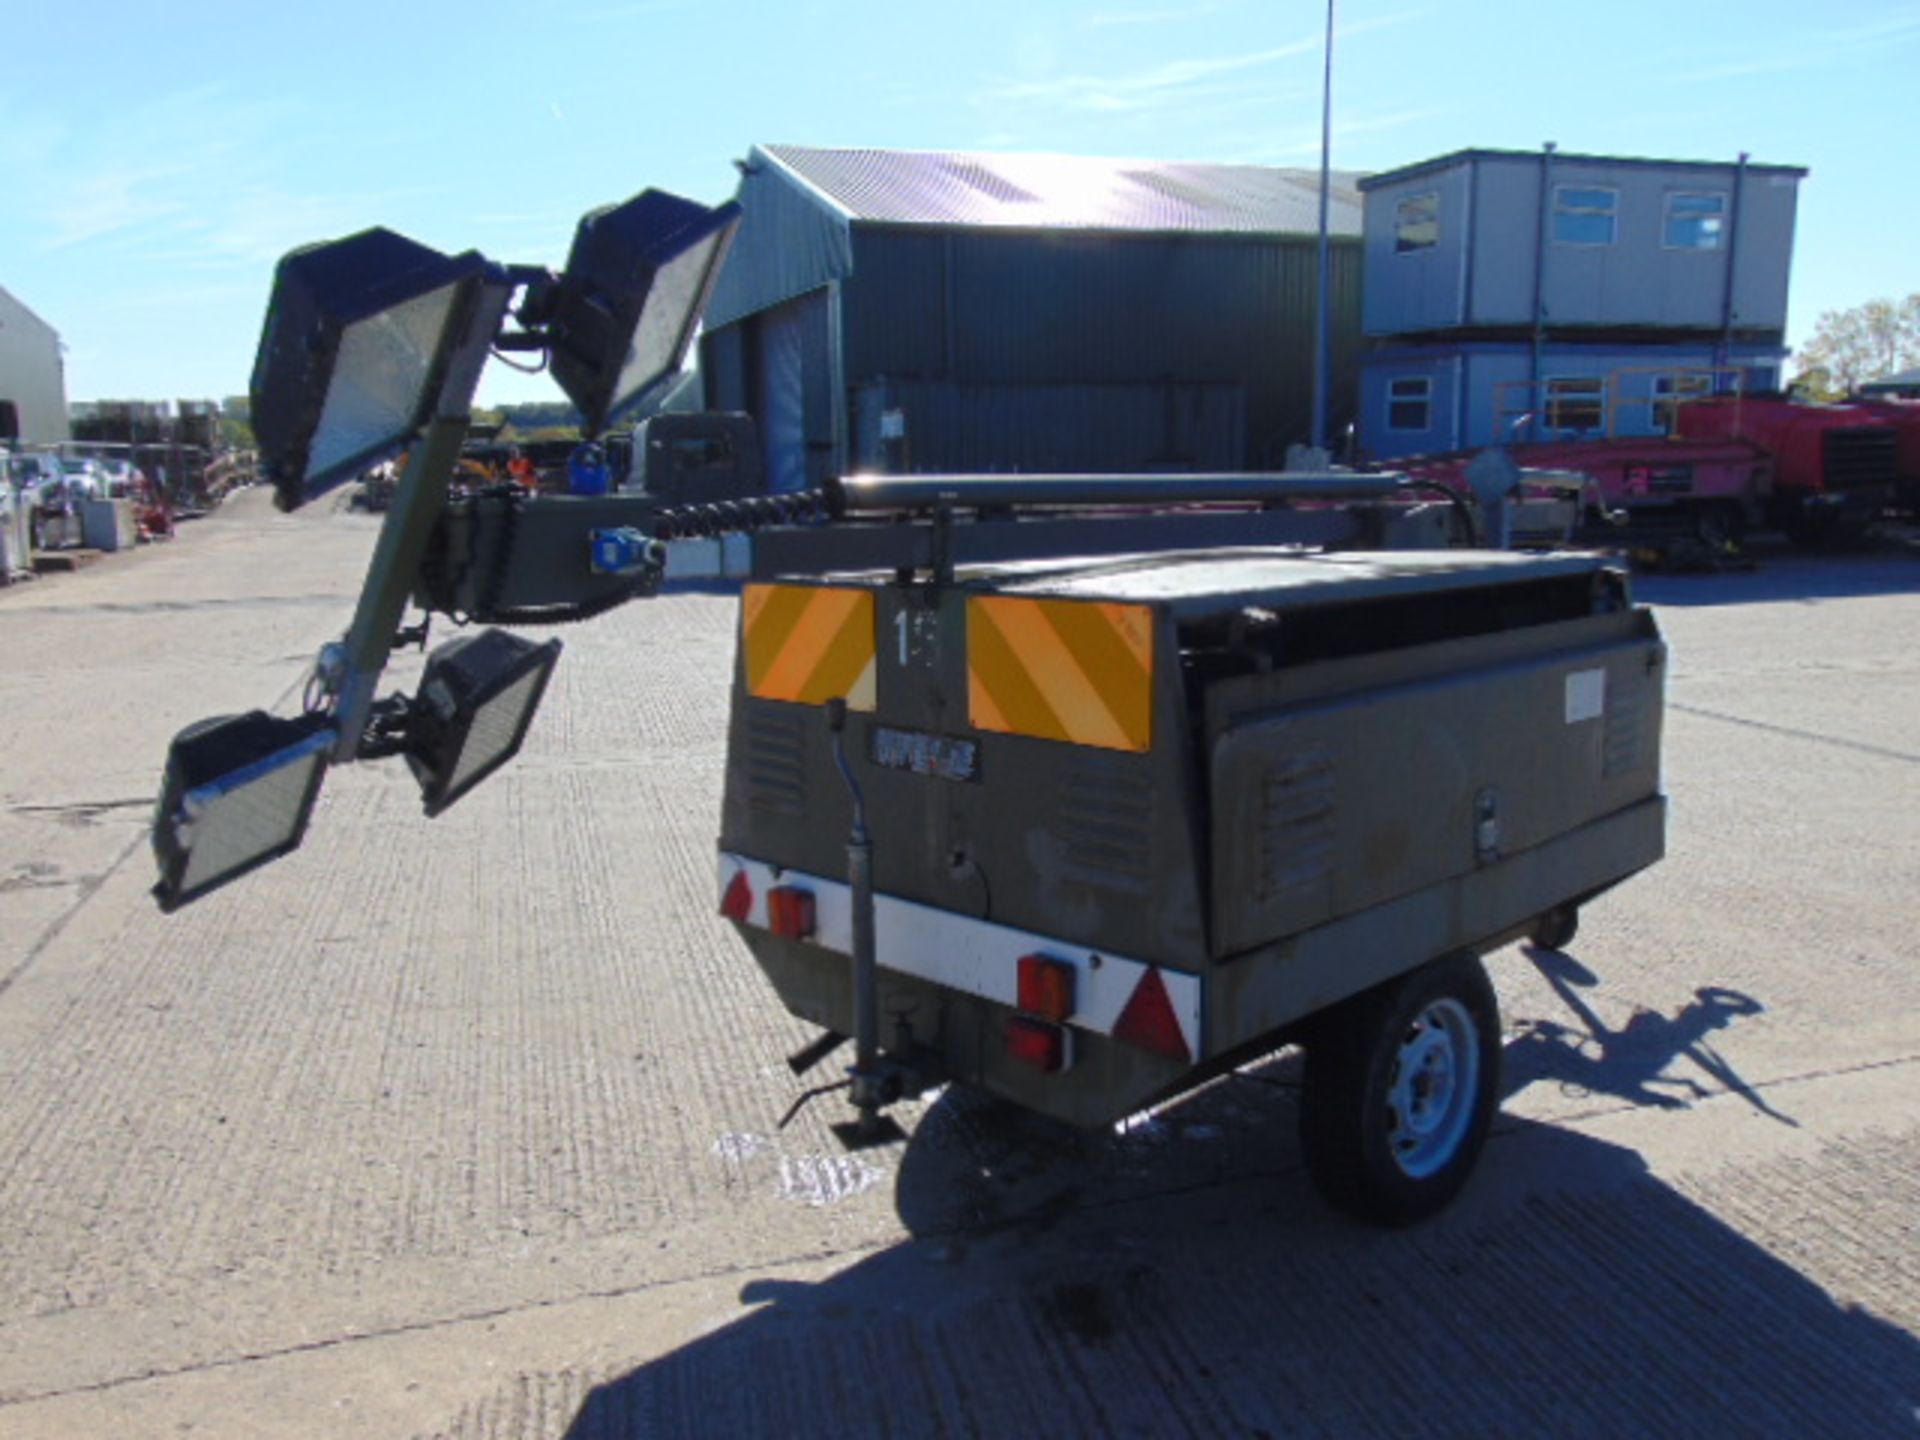 HyLite Lister Petter powered Trailer Mounted Lighting Tower - Image 9 of 23